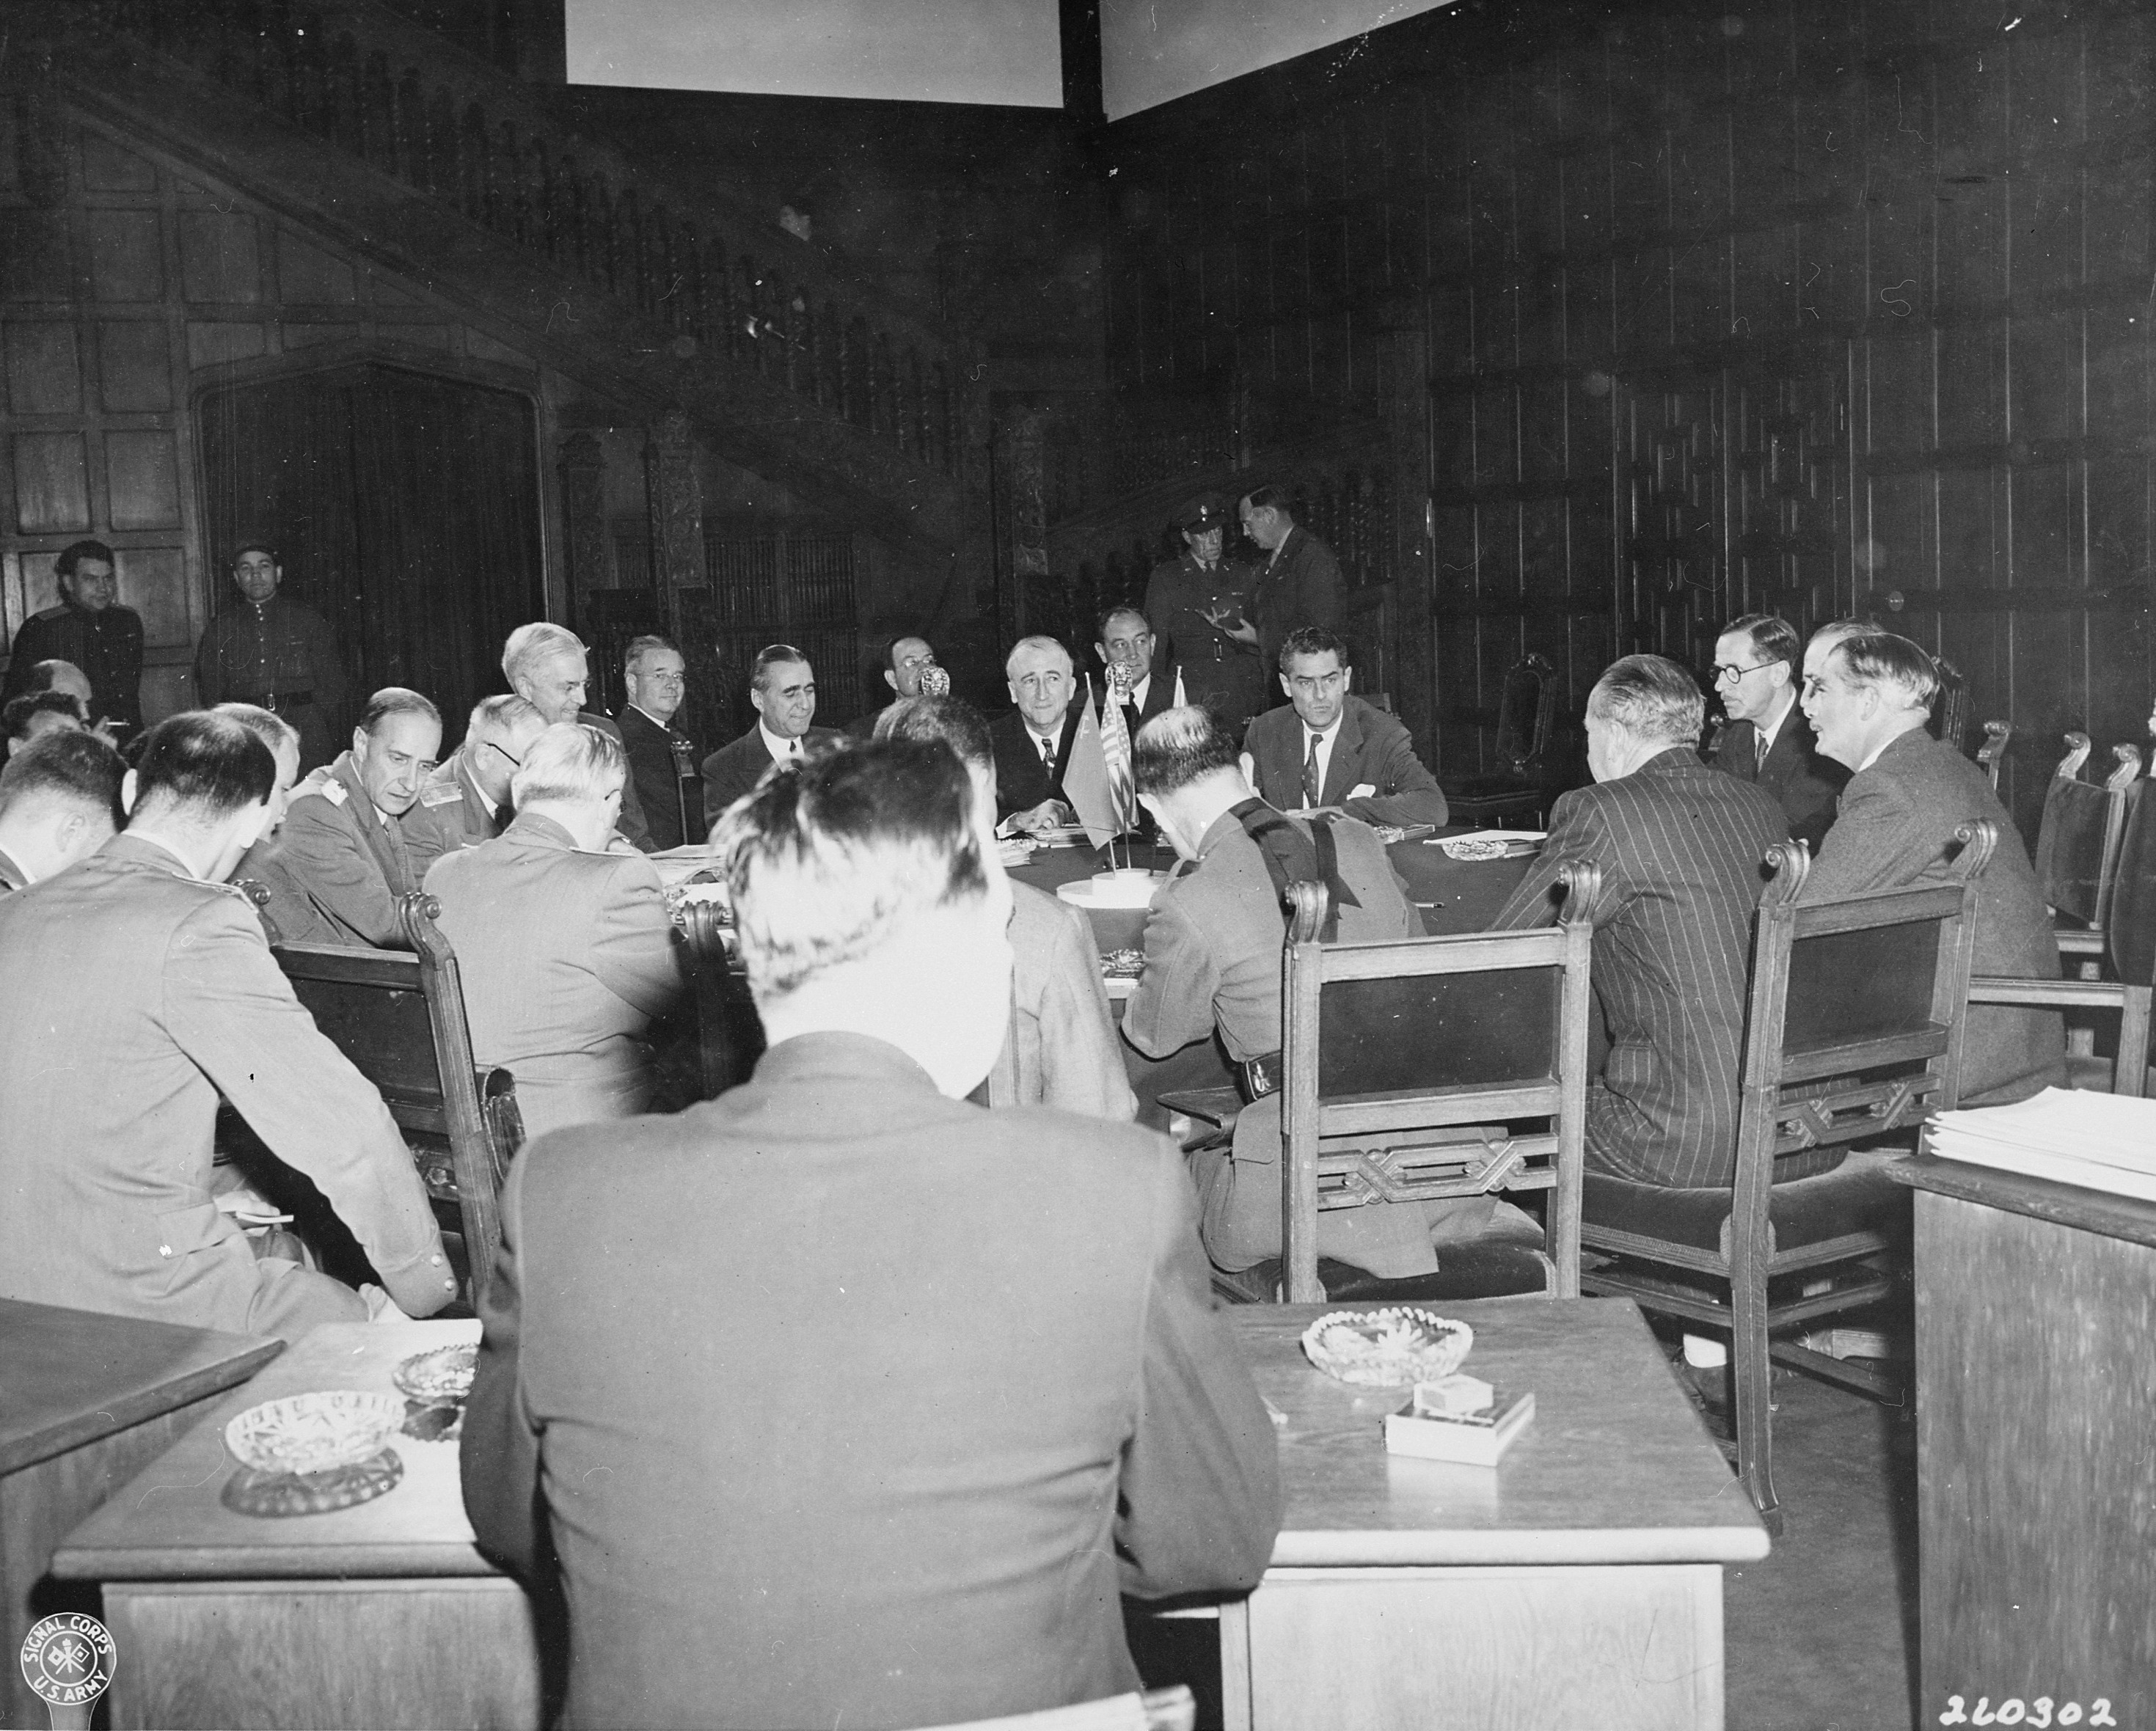 Meeting of Allied foreign ministers, Schloss Cecilienhof, Potsdam, Germany, 24 Jul 1945, photo 1 of 3; note James Byrnes of US, Anthony Eden of UK, and Vyacheslav Molotov of USSR